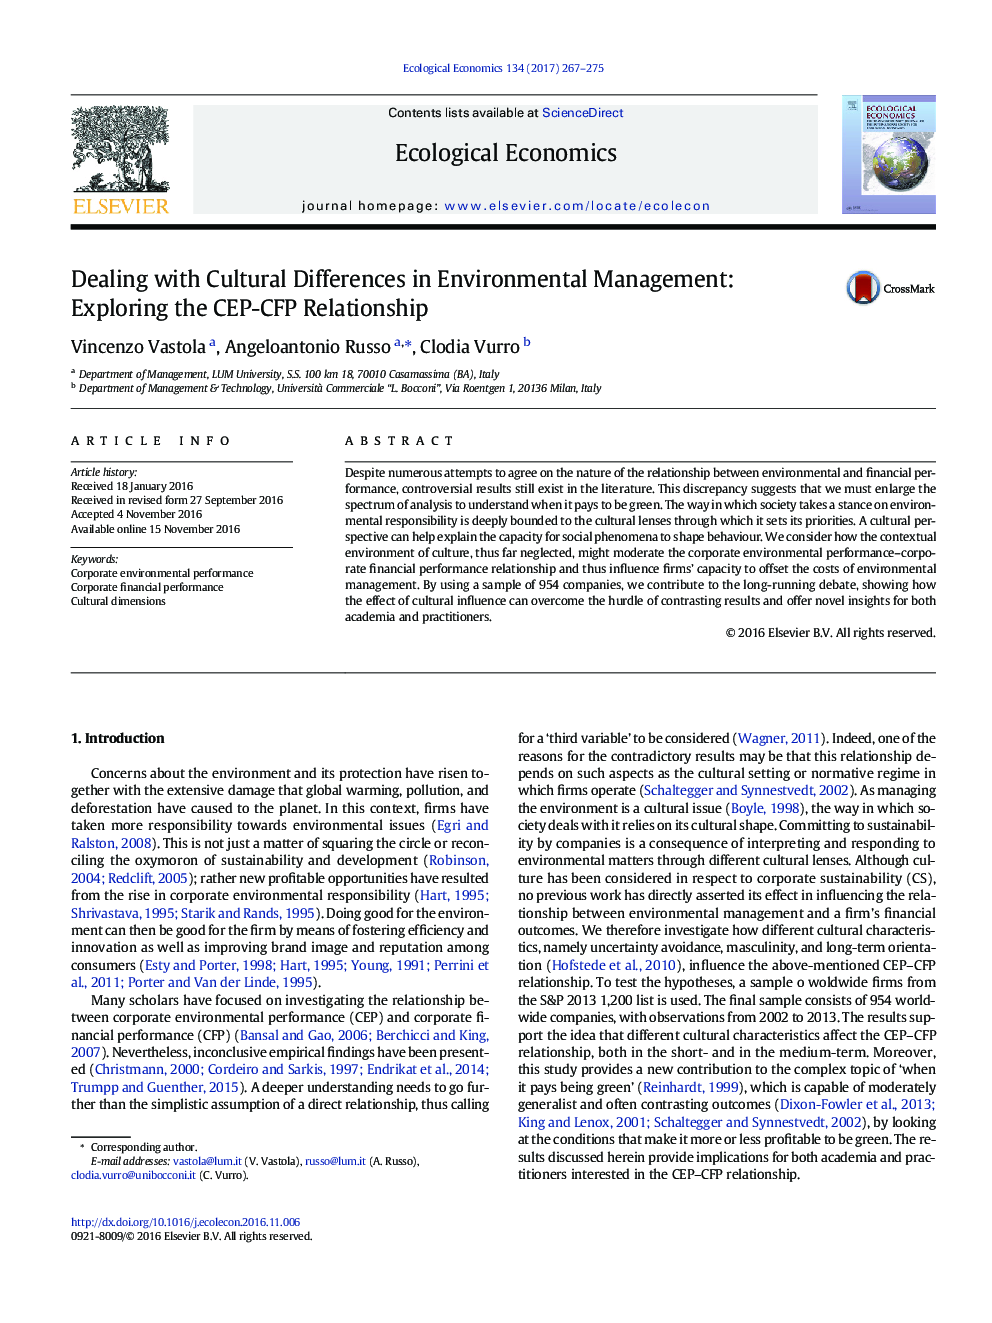 Dealing with Cultural Differences in Environmental Management: Exploring the CEP-CFP Relationship